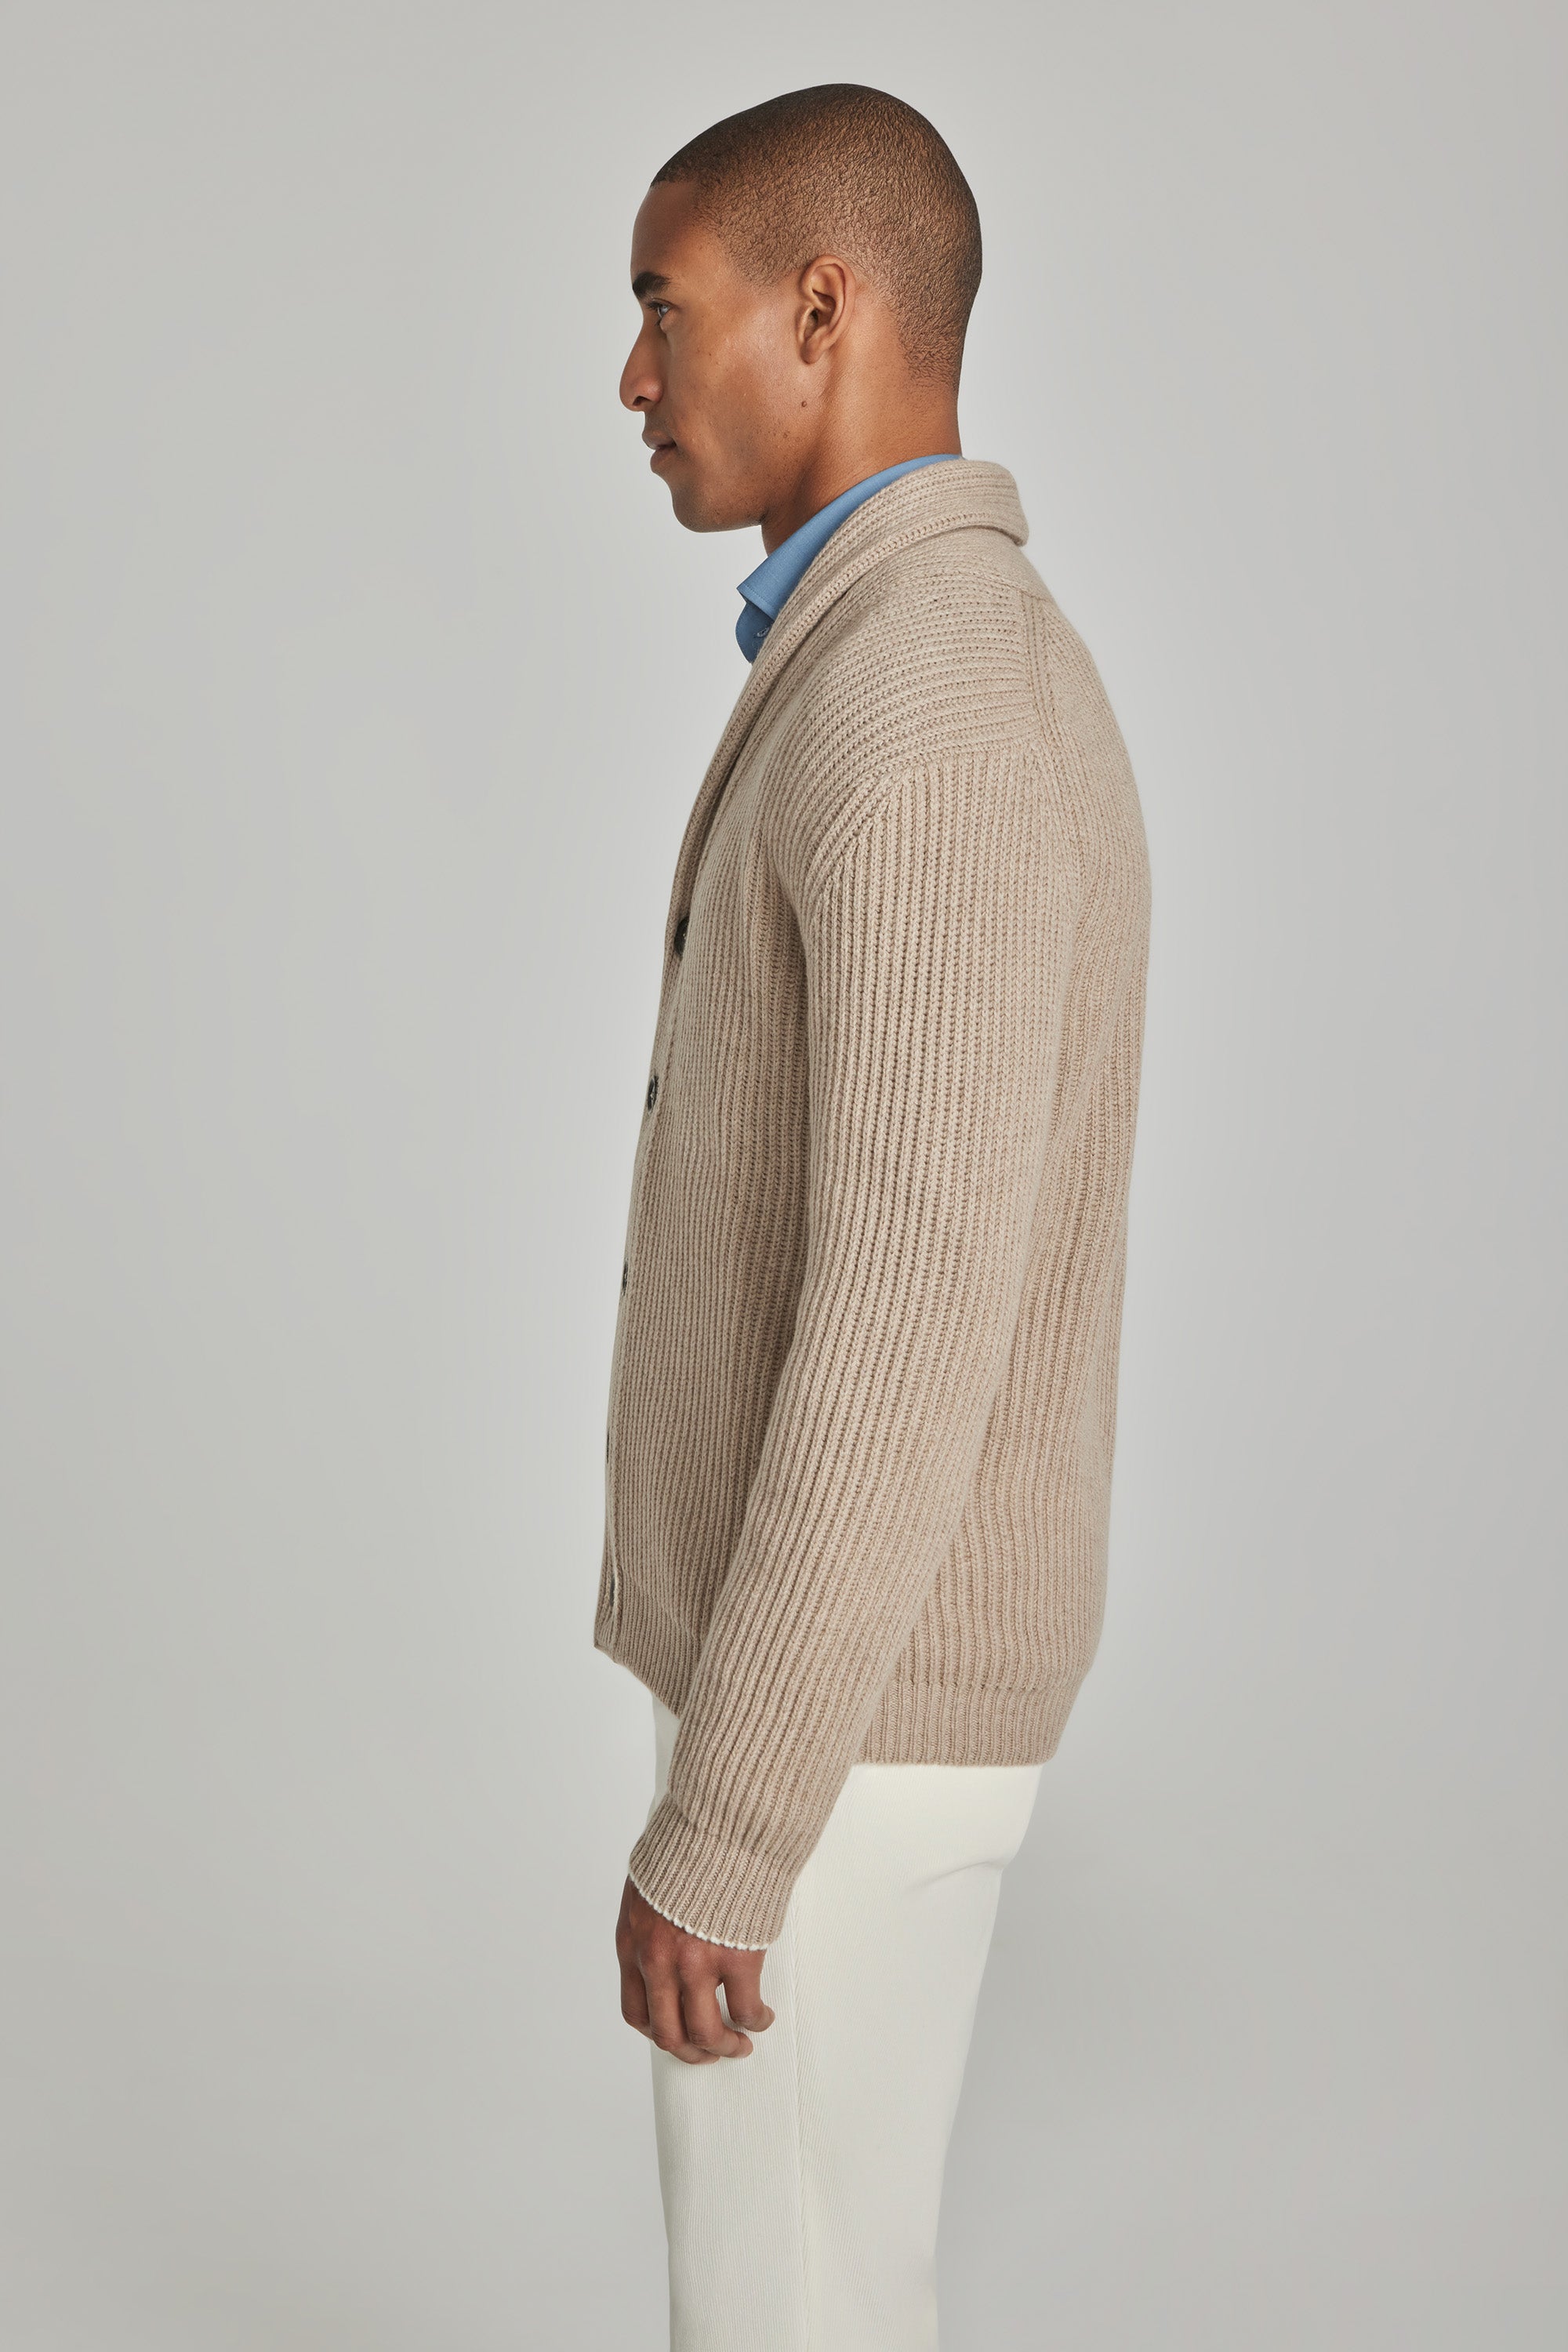 Alt view 2 Stayner Camel Solid Cashmere and Wool Shawl Cardigan